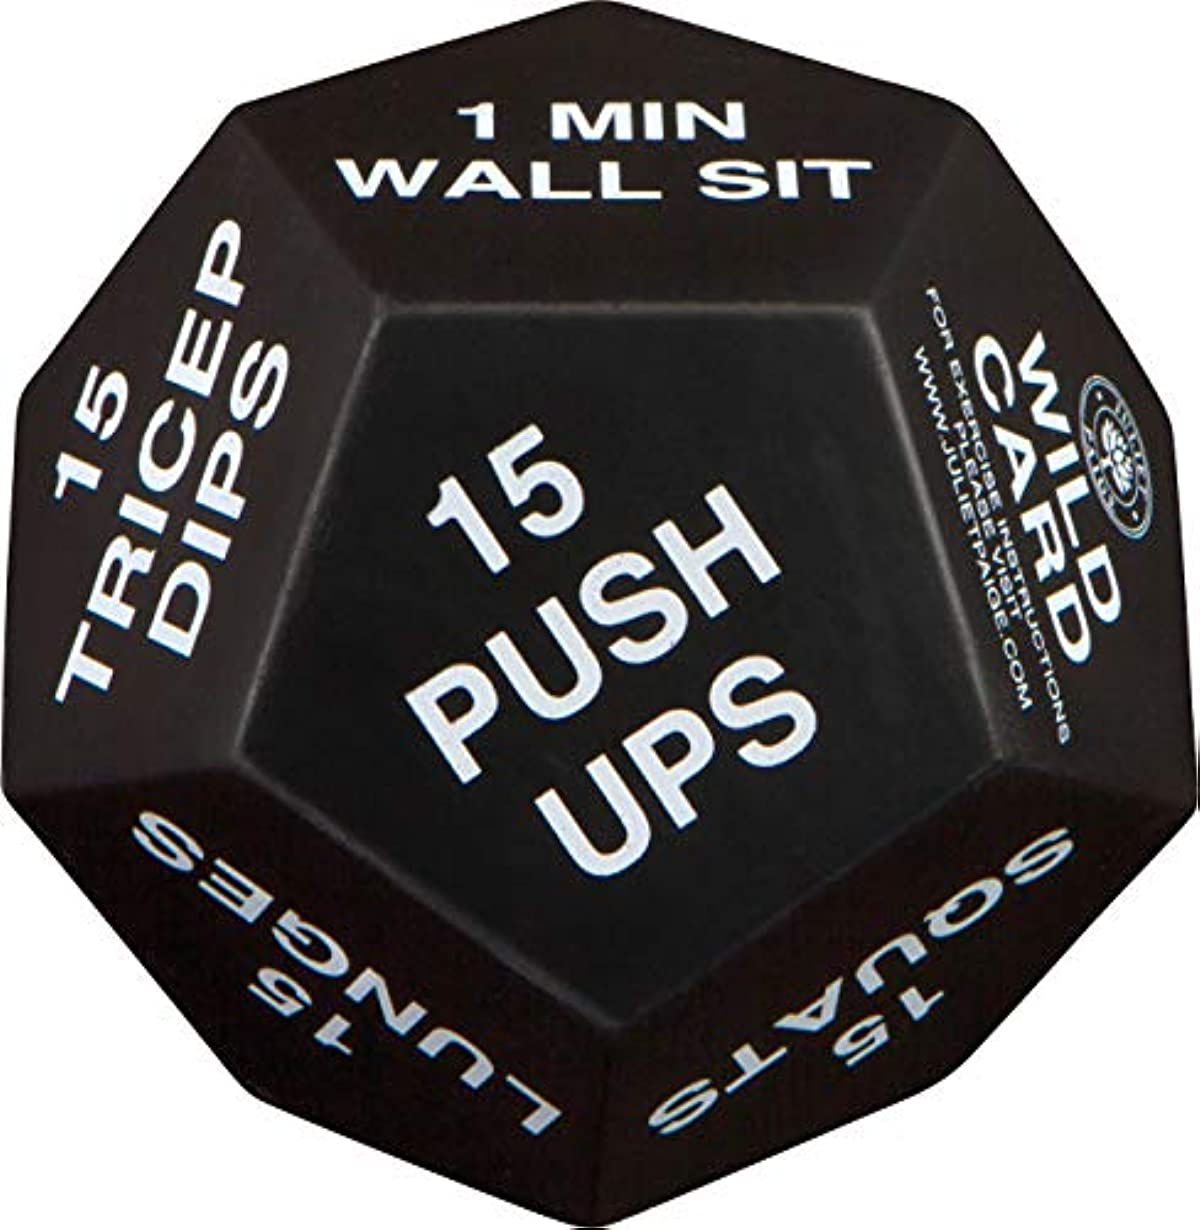 Juliet Paige Exercise Dice for Home Fitness, Workouts, WOD, Cardio, HIIT, and Sports